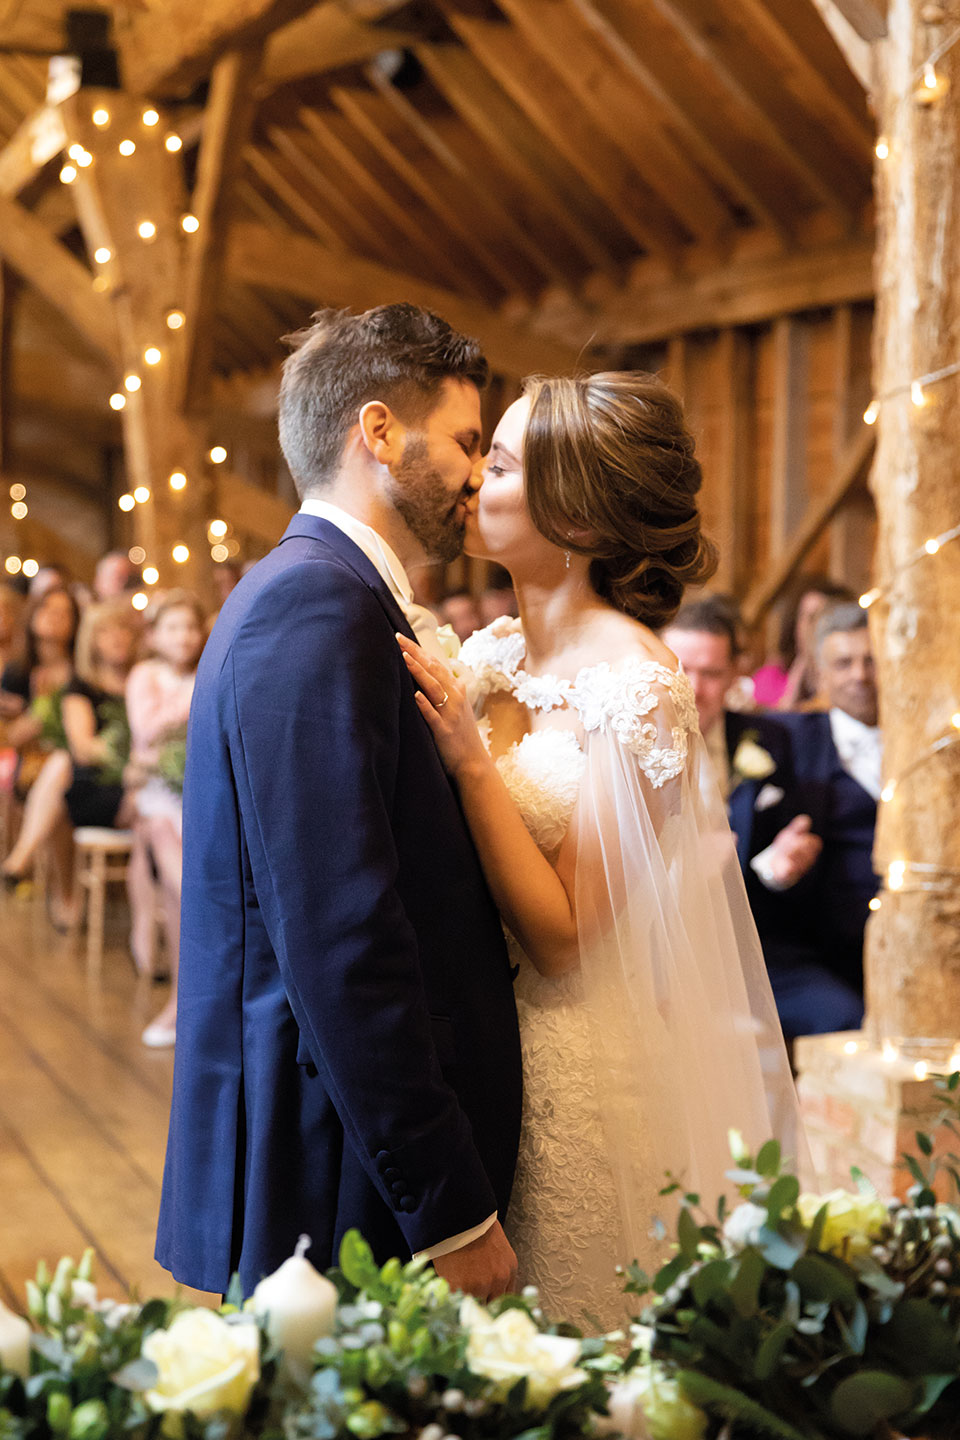 The newlyweds share a kiss in the Rickety Barn at Bassmead Manor Barns during their wedding ceremony